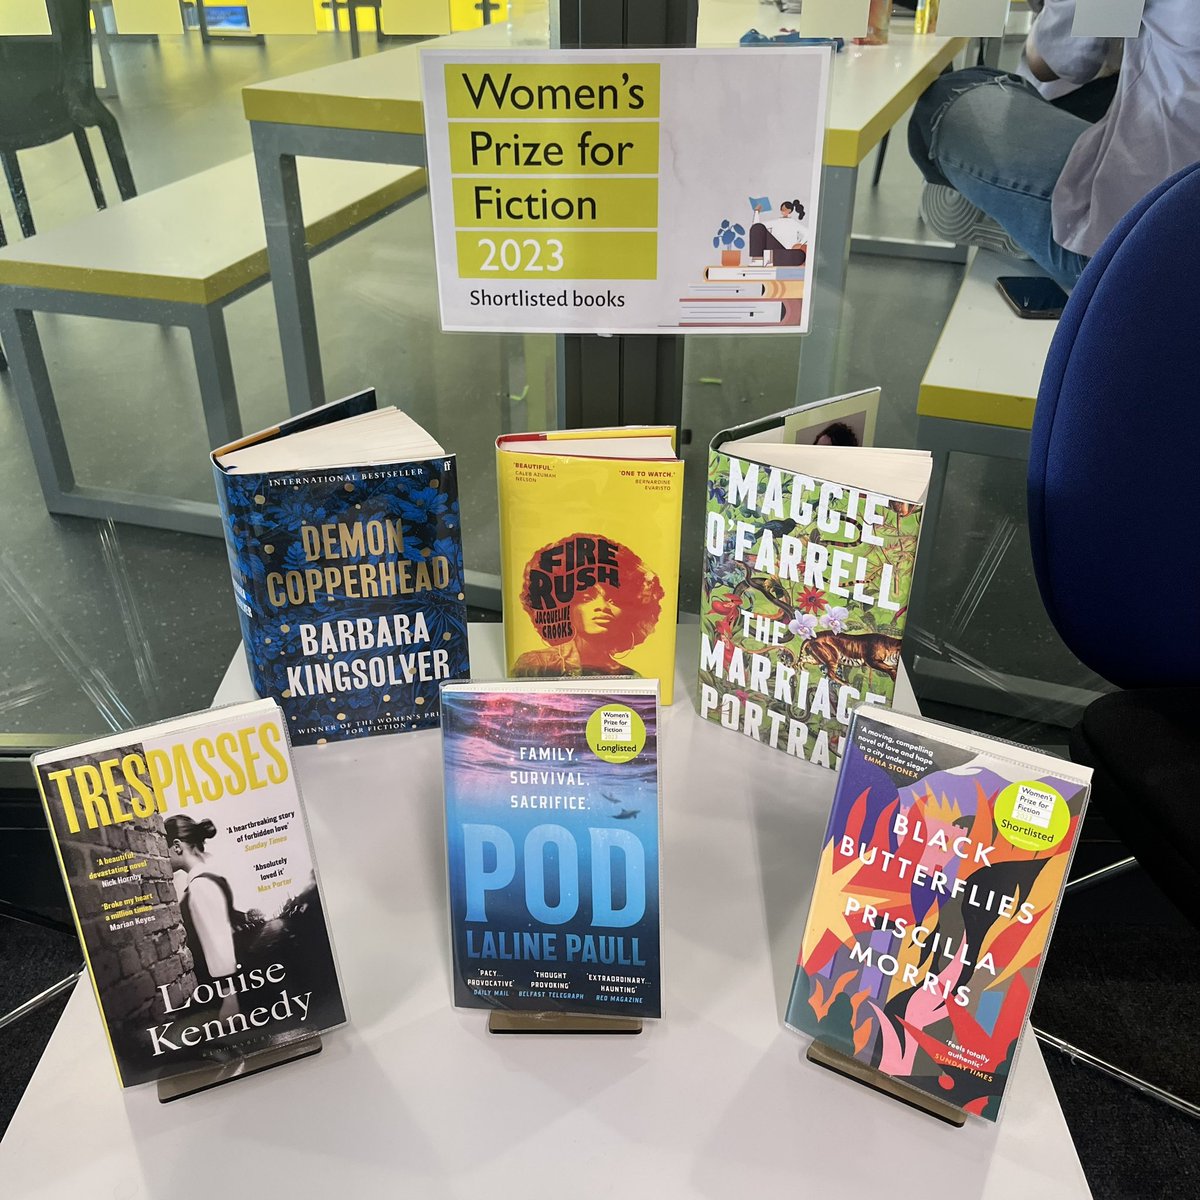 Did you know we have the newest shortlist books for @womensprize available to borrow?!? 
Pop and see us after the break to borrow these amazing reads 

#womensprizeforfiction  #shortlist #demoncopperhead #firerush #themarriageportrait #blackbutterflies #pod #tresspasses